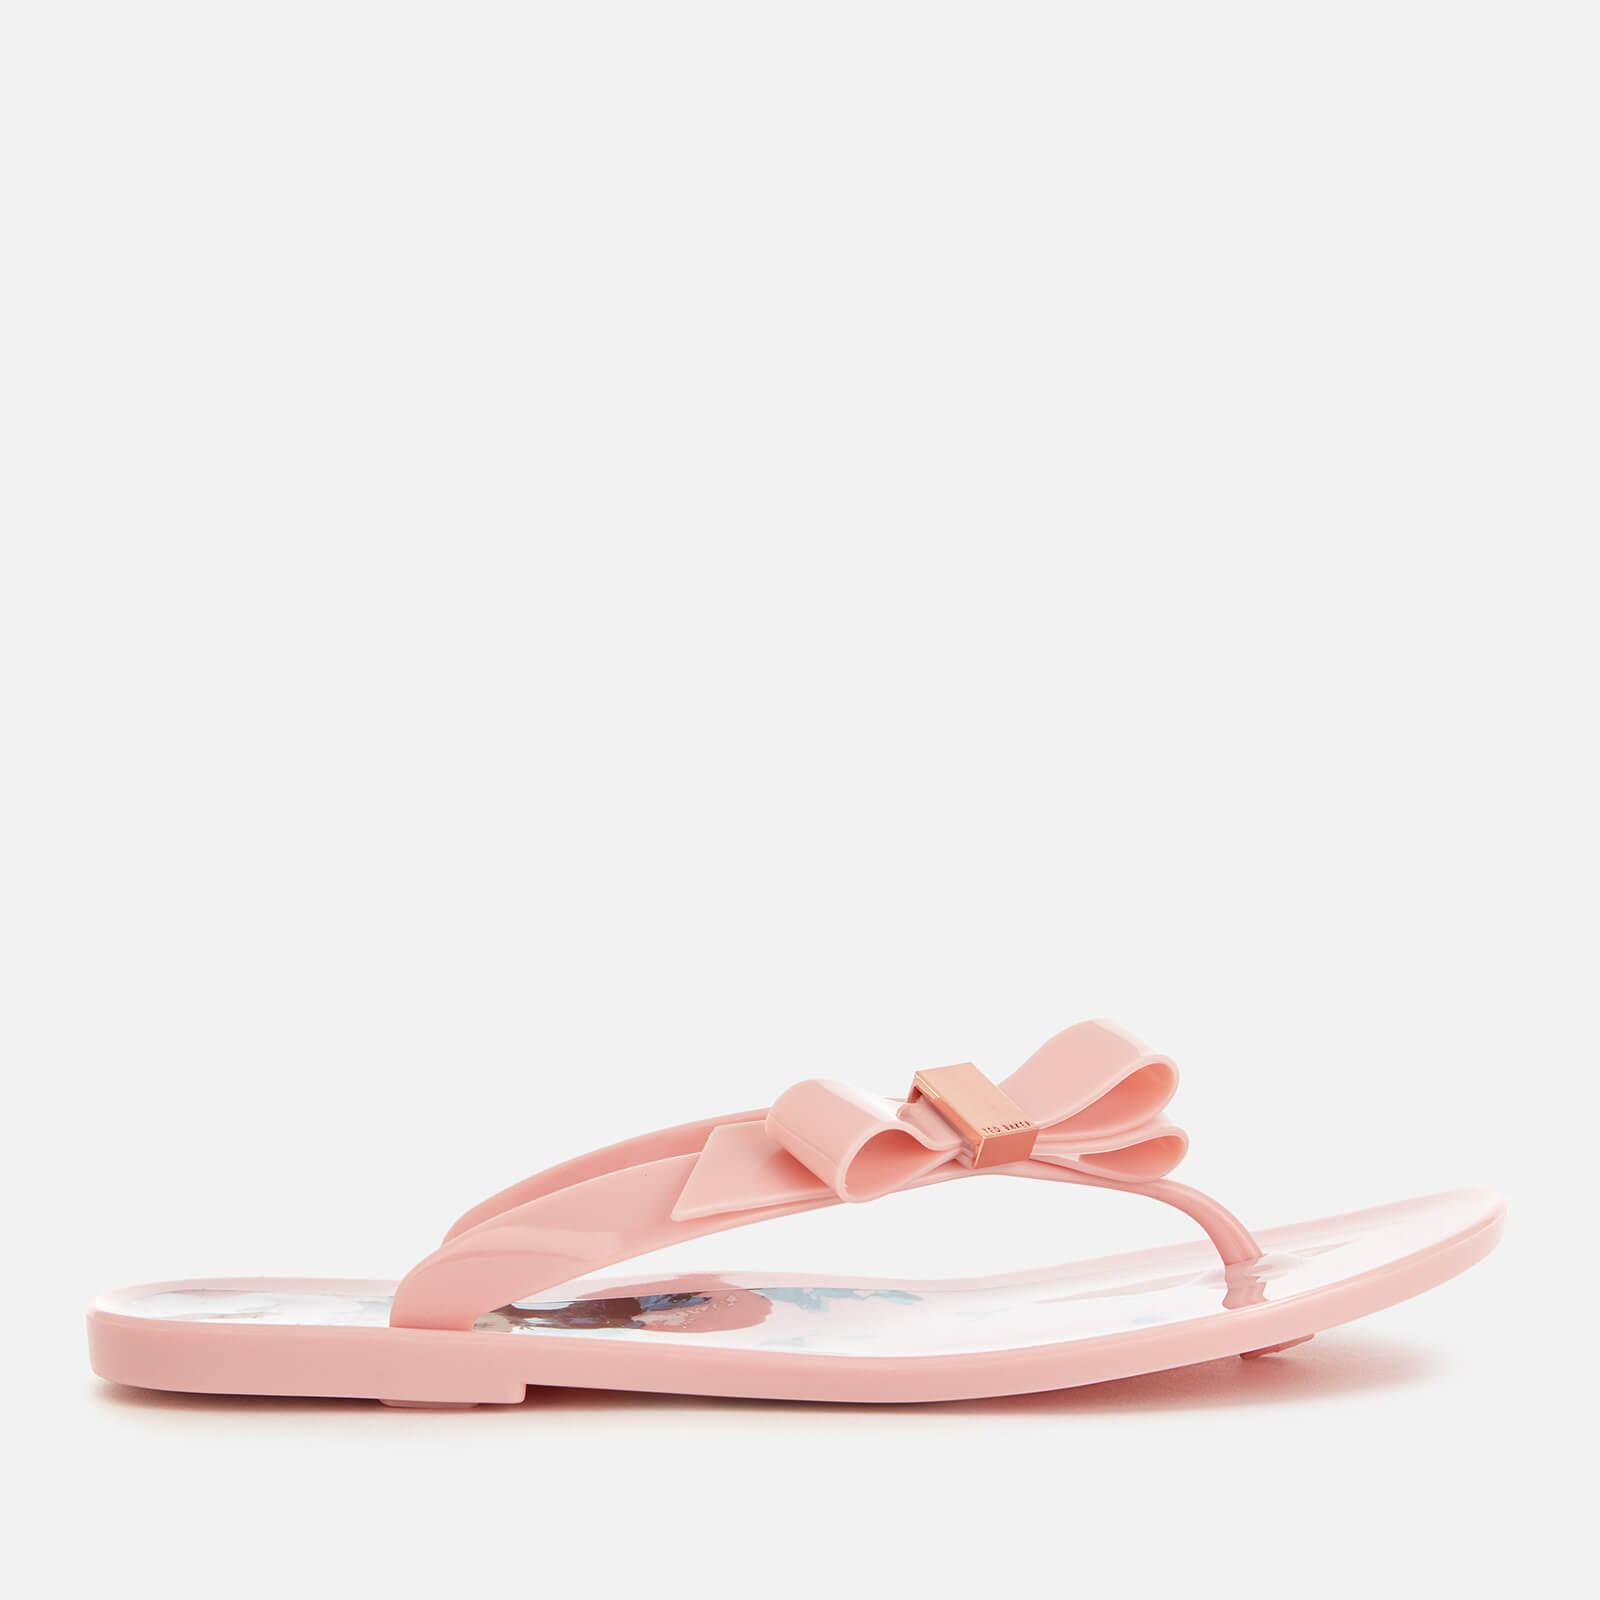 Ted Baker Suzzip Bow Flip Flops in Pink - Save 26% - Lyst